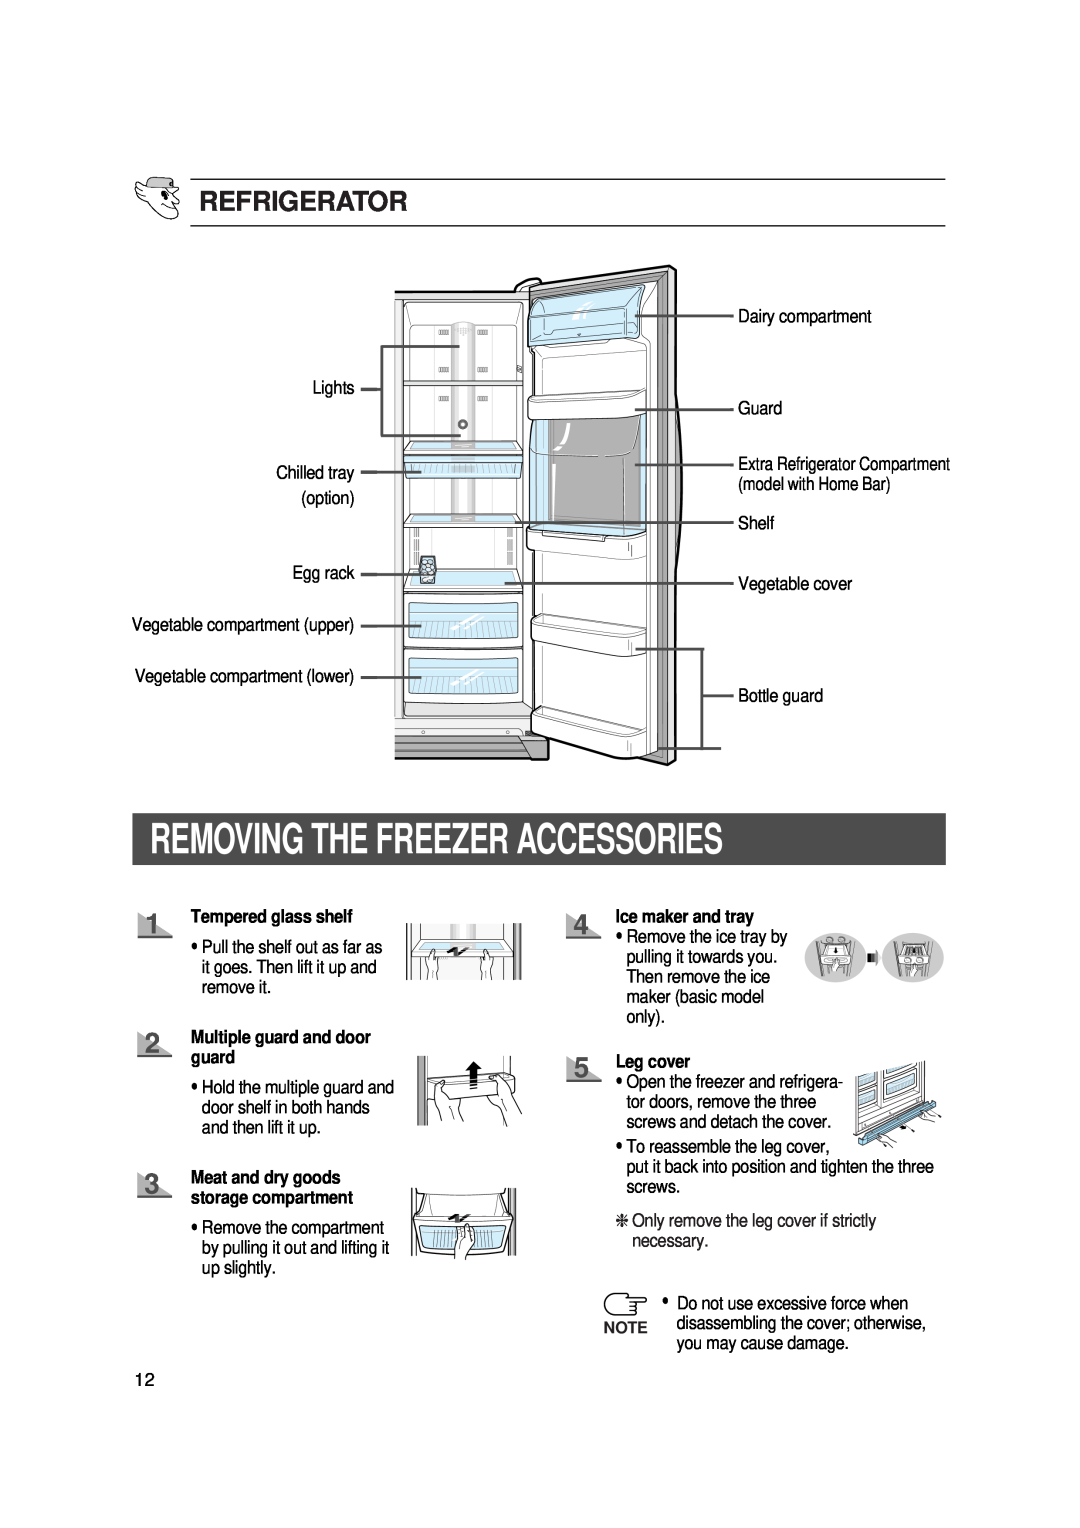 Samsung SR-S22, SR-S20 user manual Removing The Freezer Accessories, Refrigerator, guard, Ice maker and tray, Leg cover 